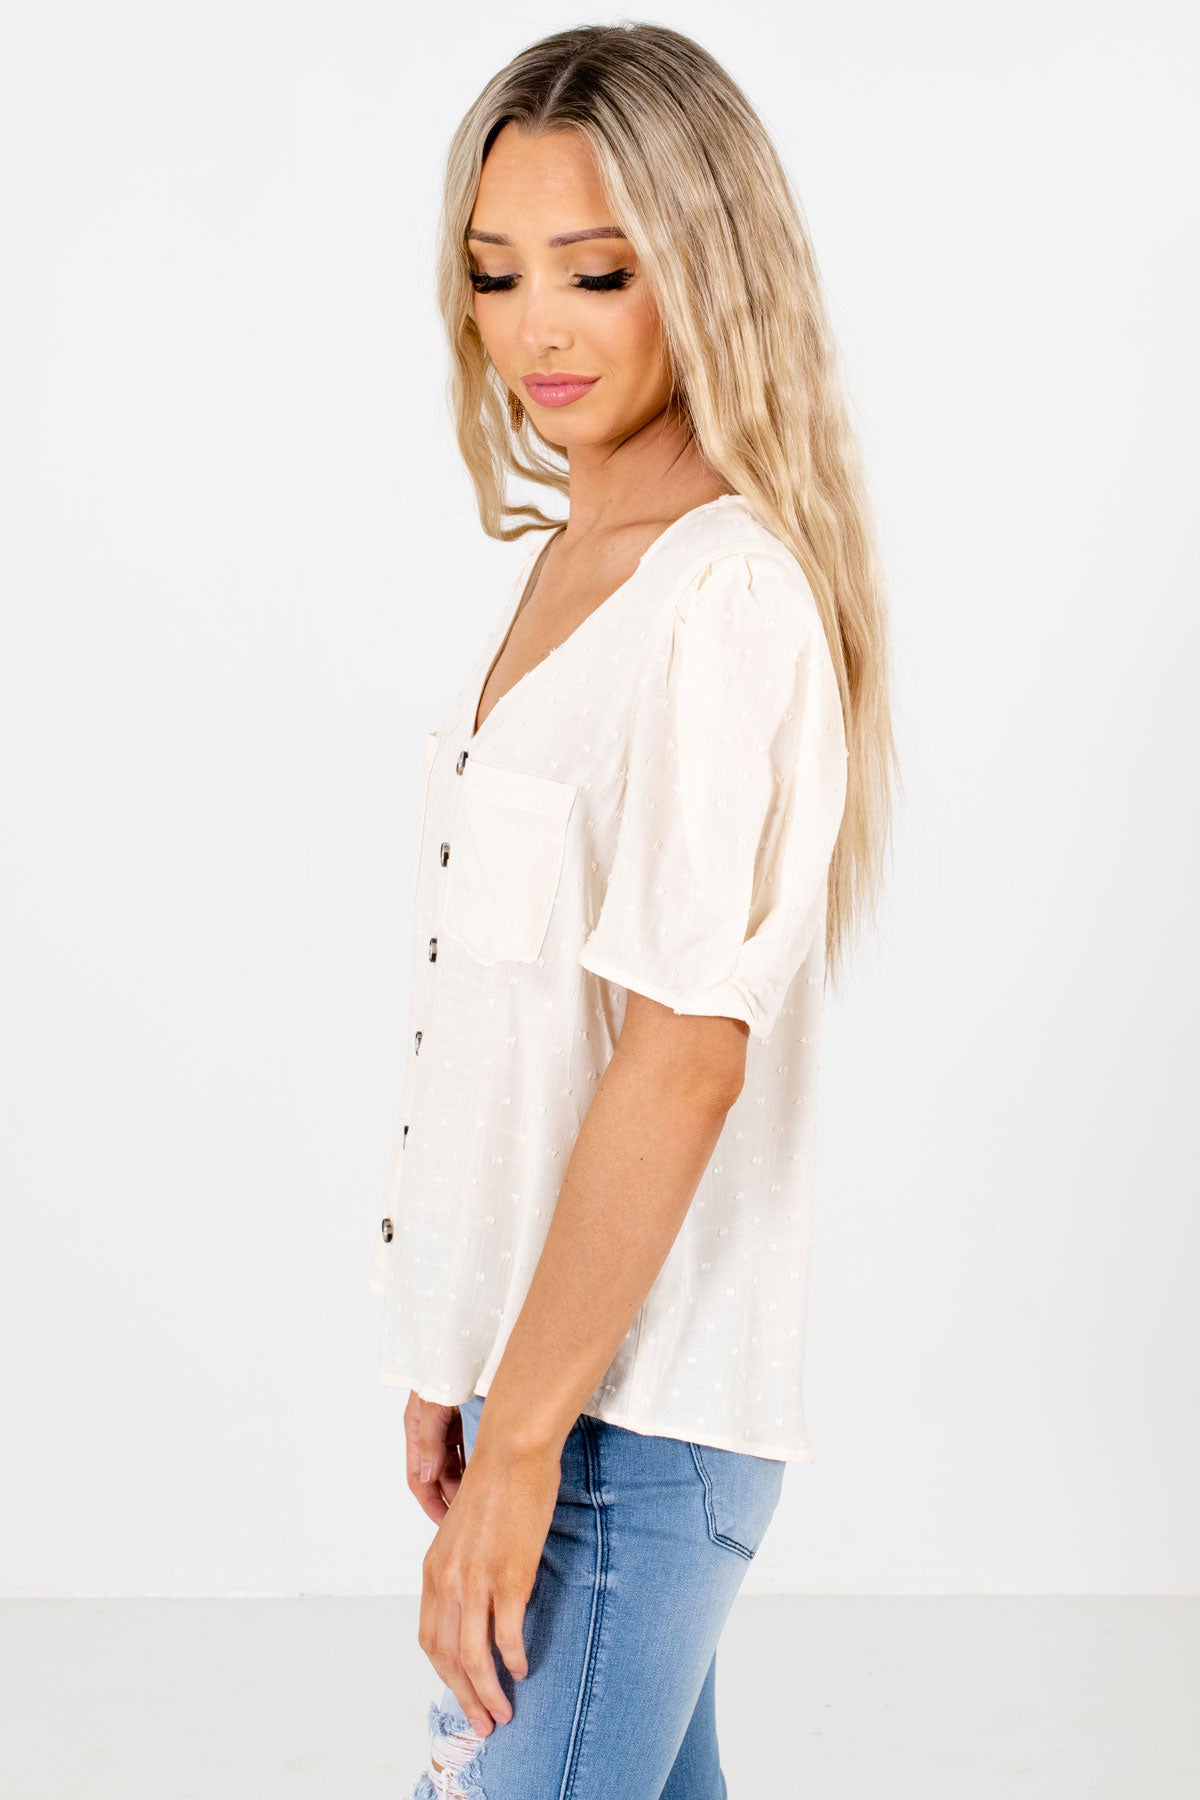 Cream Lightweight High-Quality Material Boutique Blouses for Women